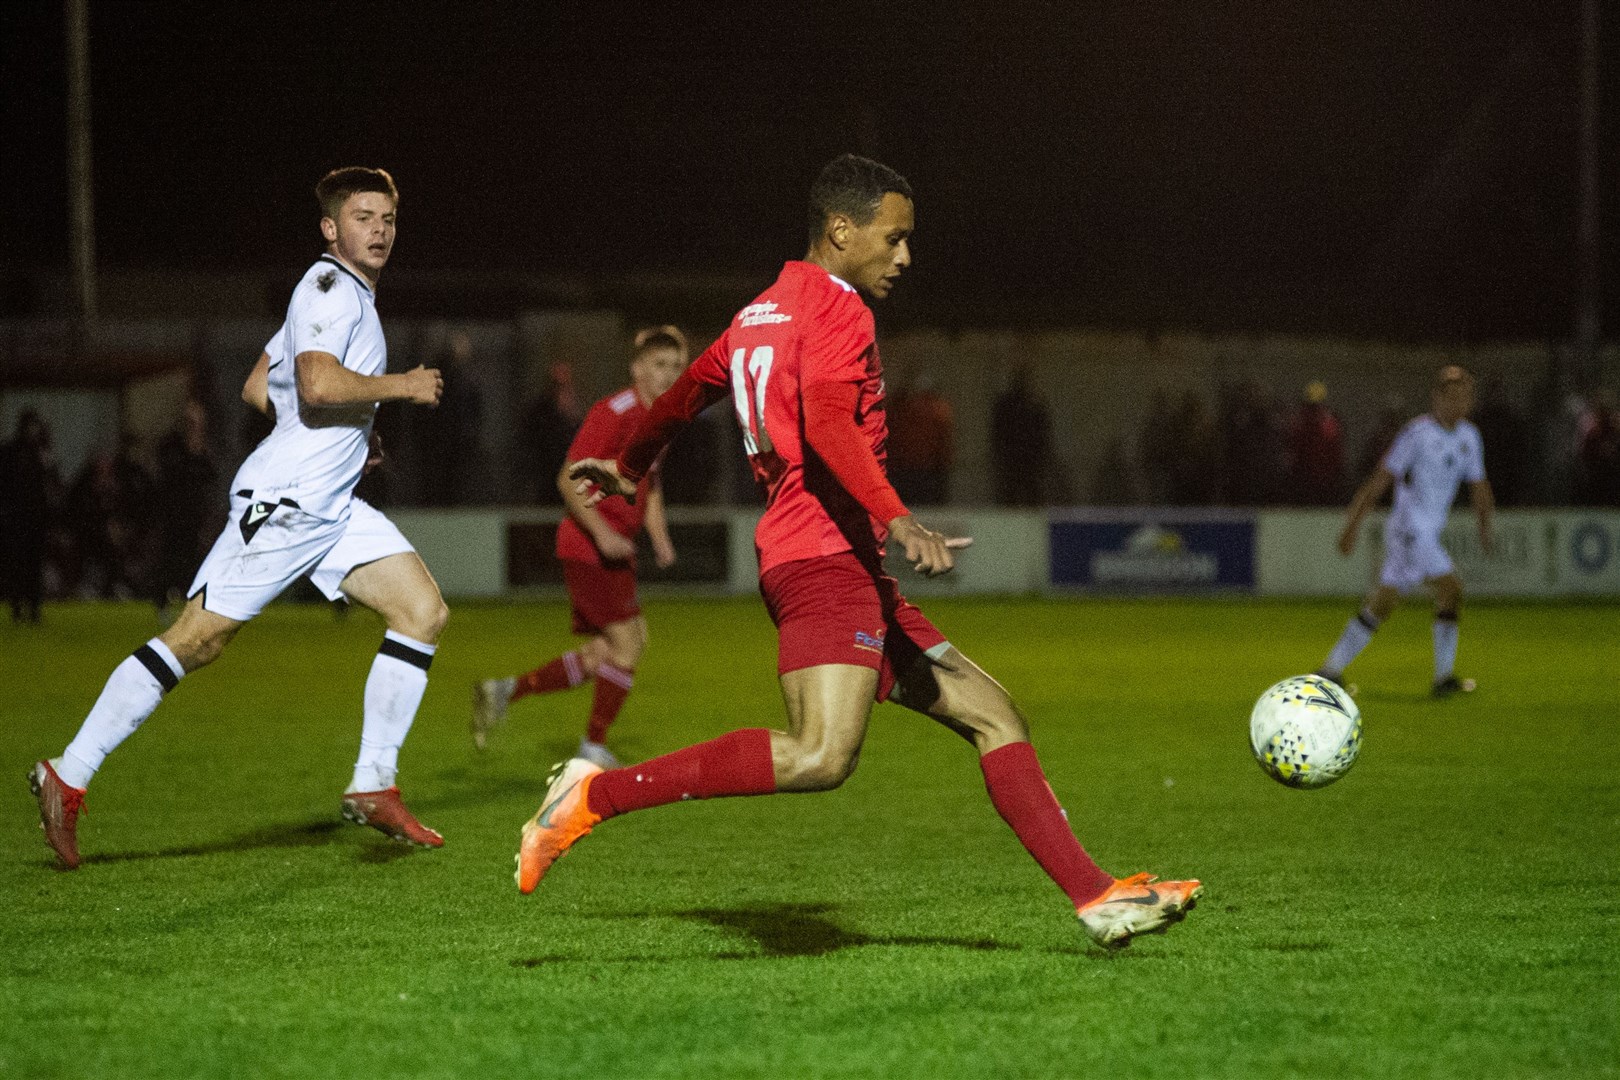 Lossiemouth's Fraser Forbes clears the ball up the park...Lossiemouth FC (0) vs Rothes FC (1) - Grant Park, Lossiemouth 03/11/2021 - Highland Football League...Picture: Daniel Forsyth..